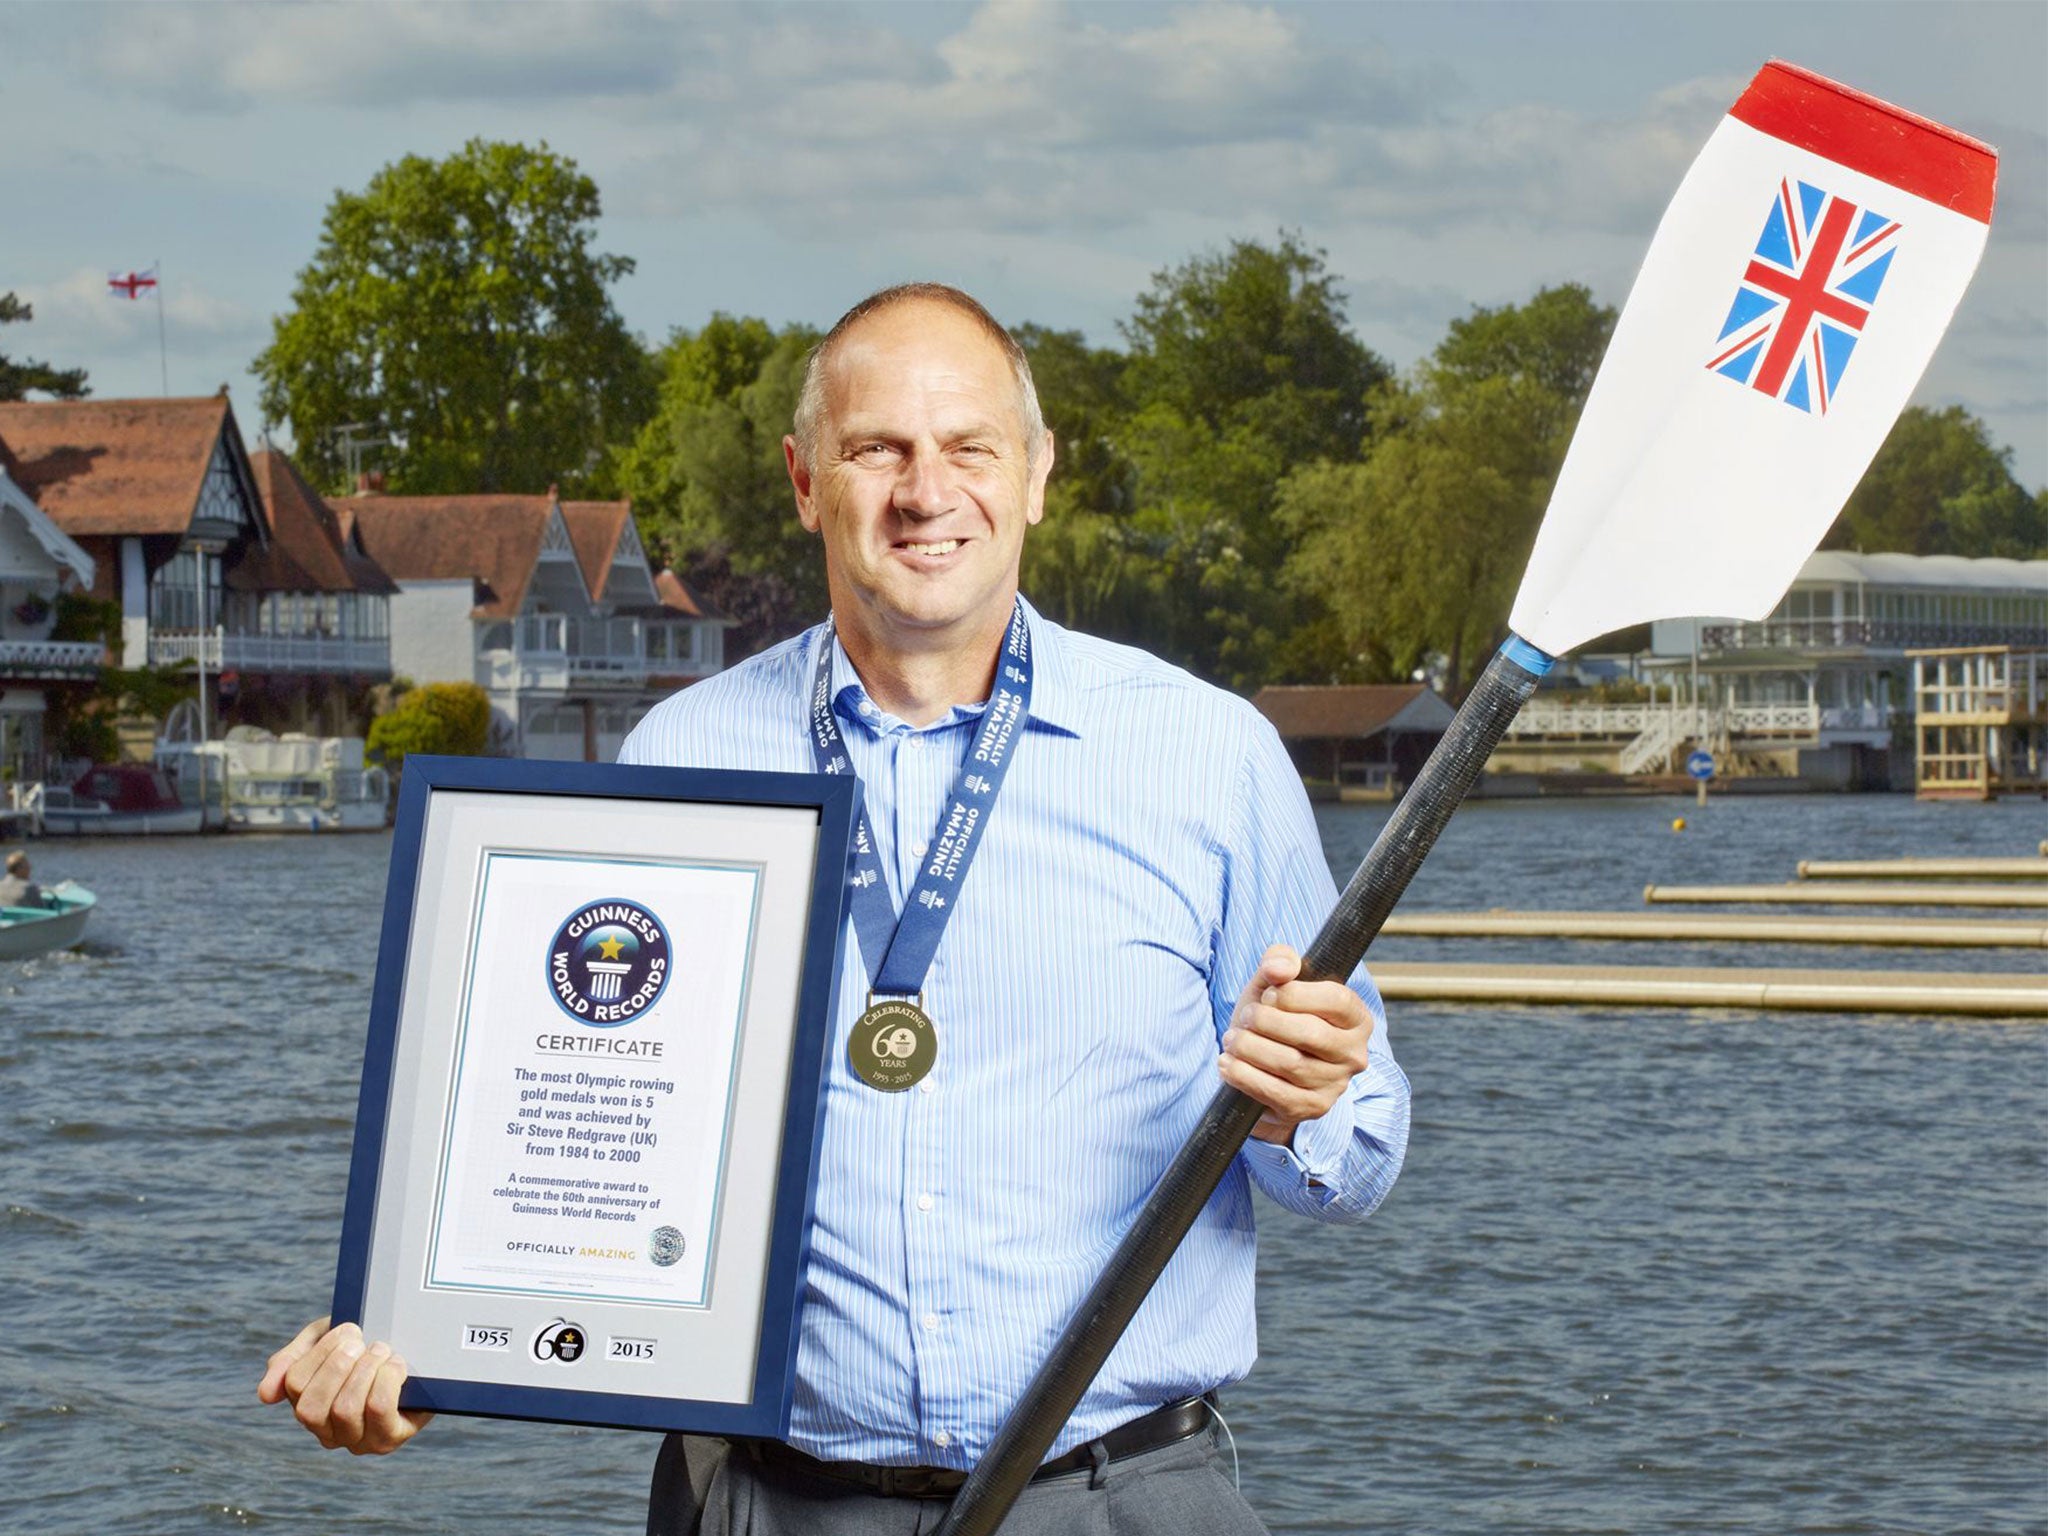 Sir Steve Redgrave, who holds the men's record for Most Olympic Rowing Gold Medals